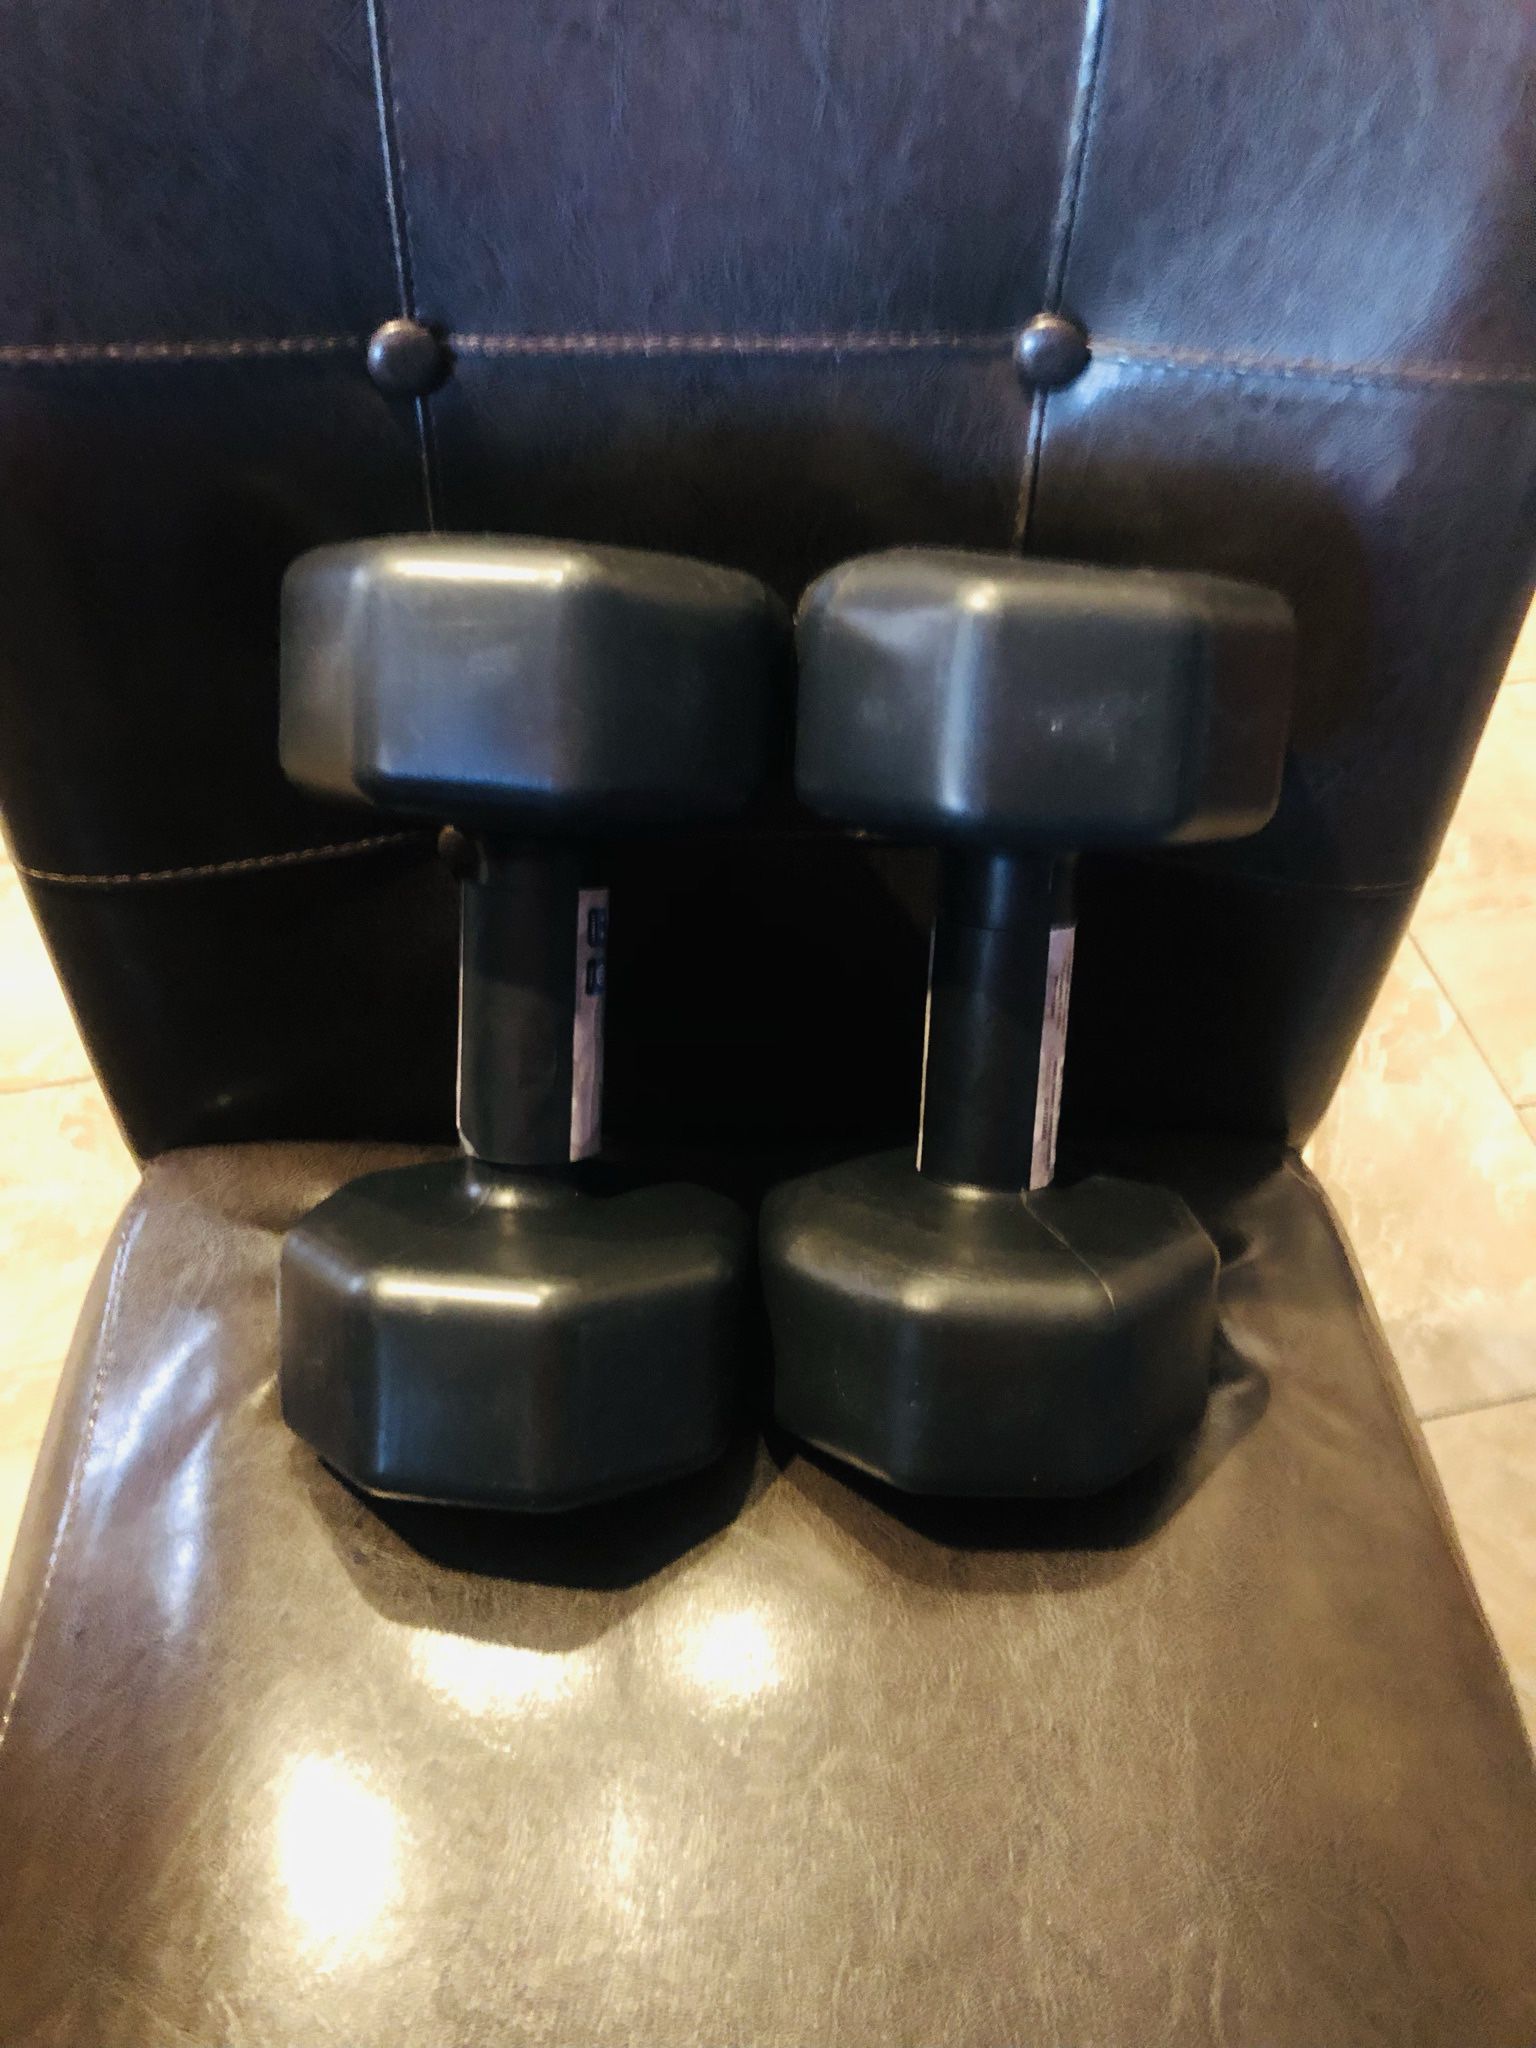 5LB weights 